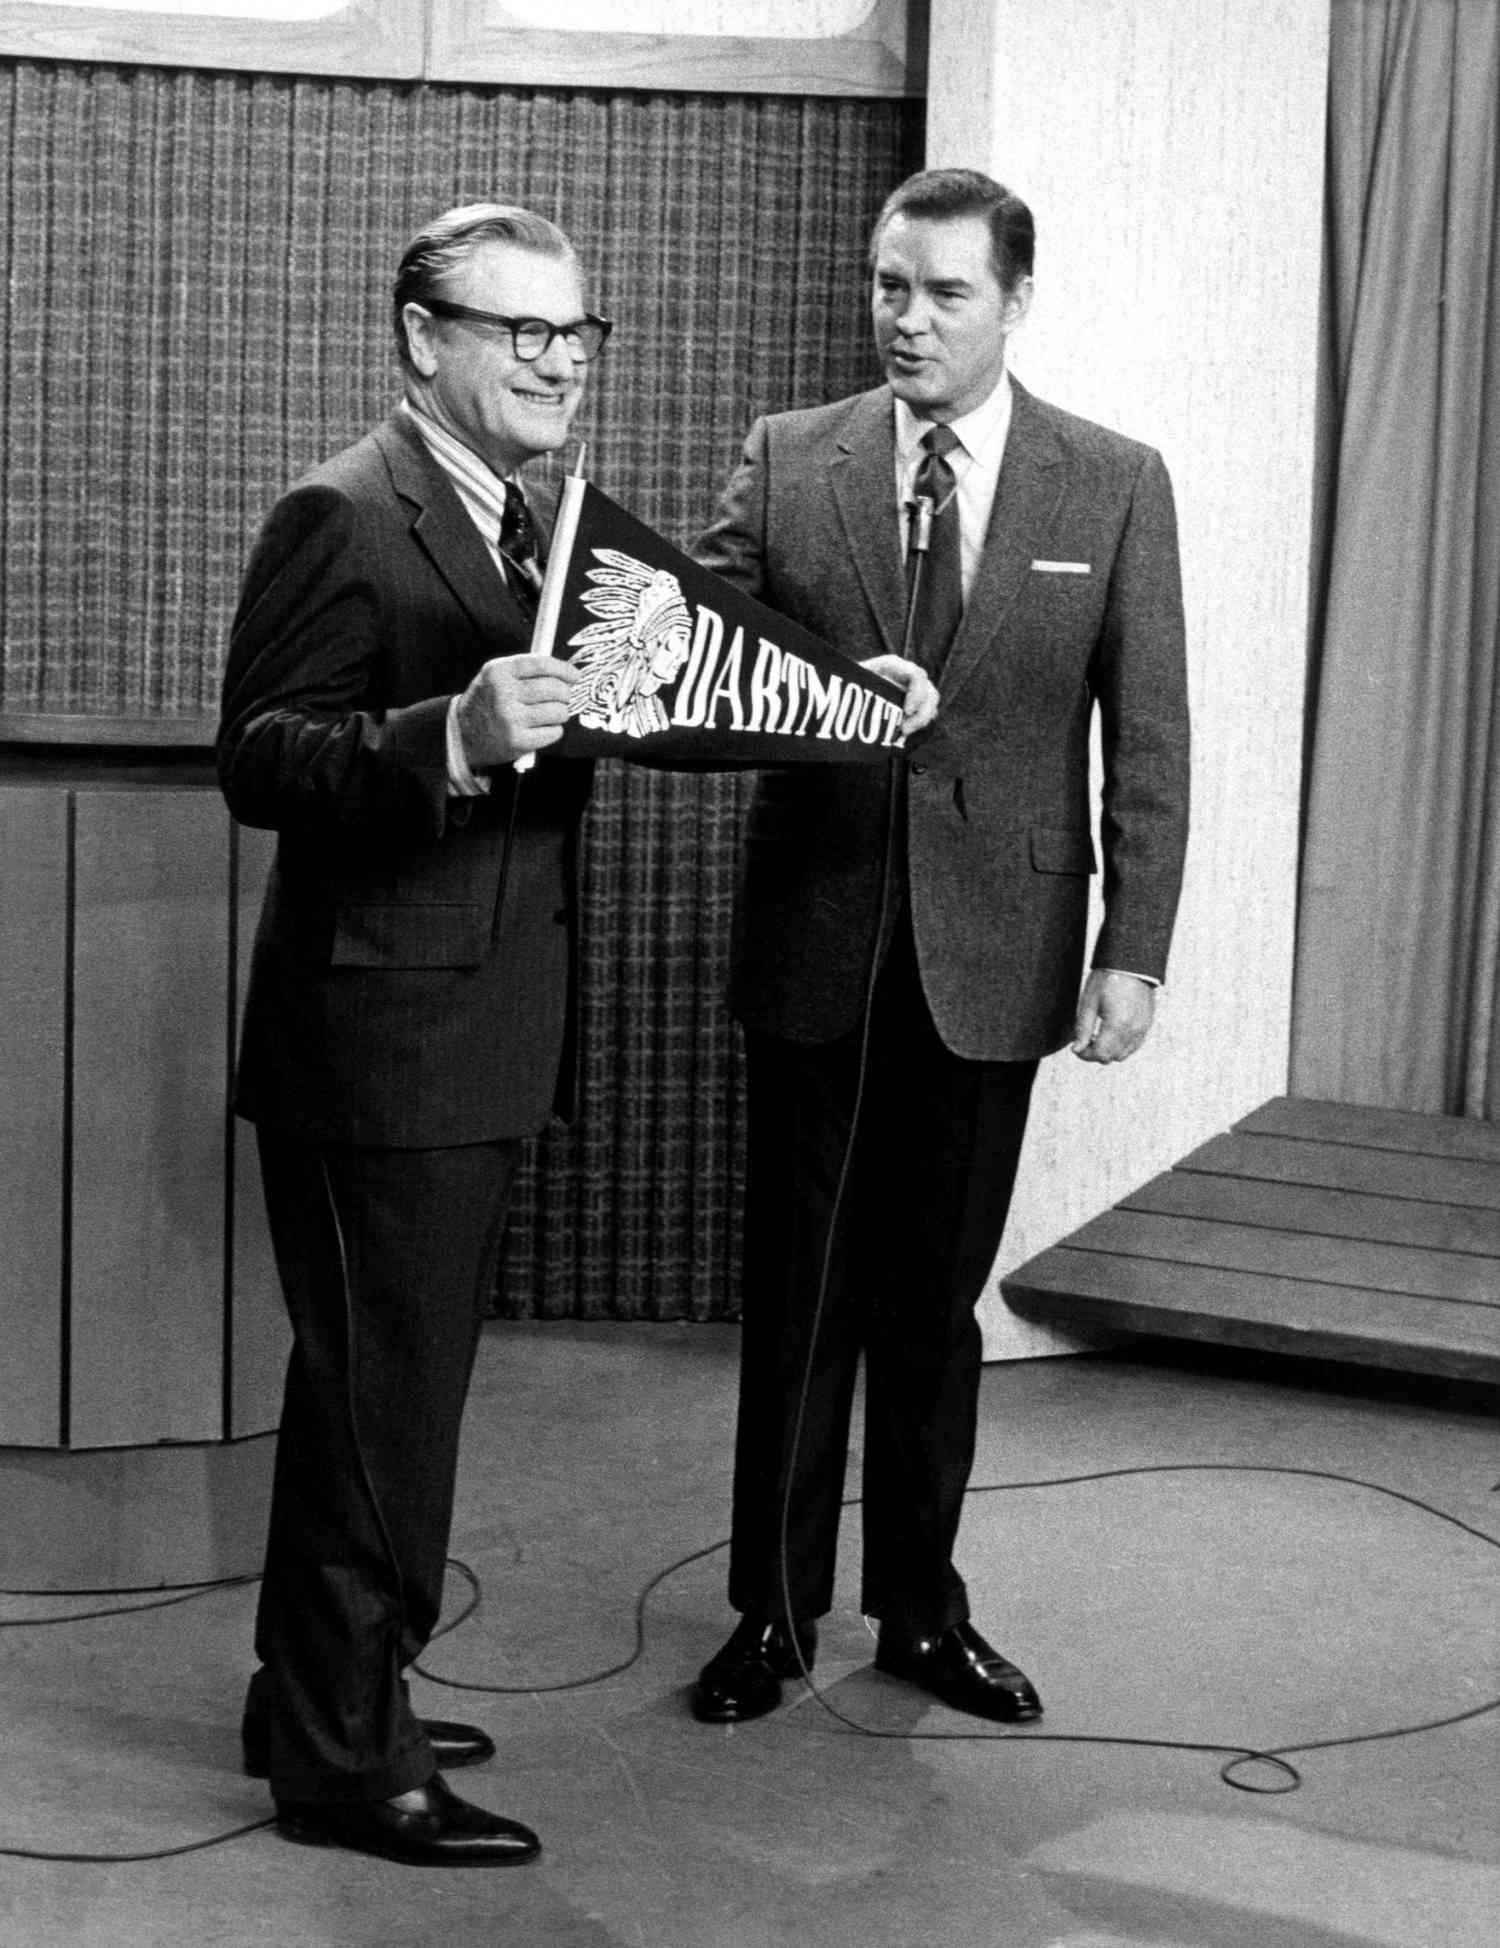 Art Fleming With New York Governor Nelson Rockefeller on&nbsp;Jeopardy!&nbsp;in the 1960s